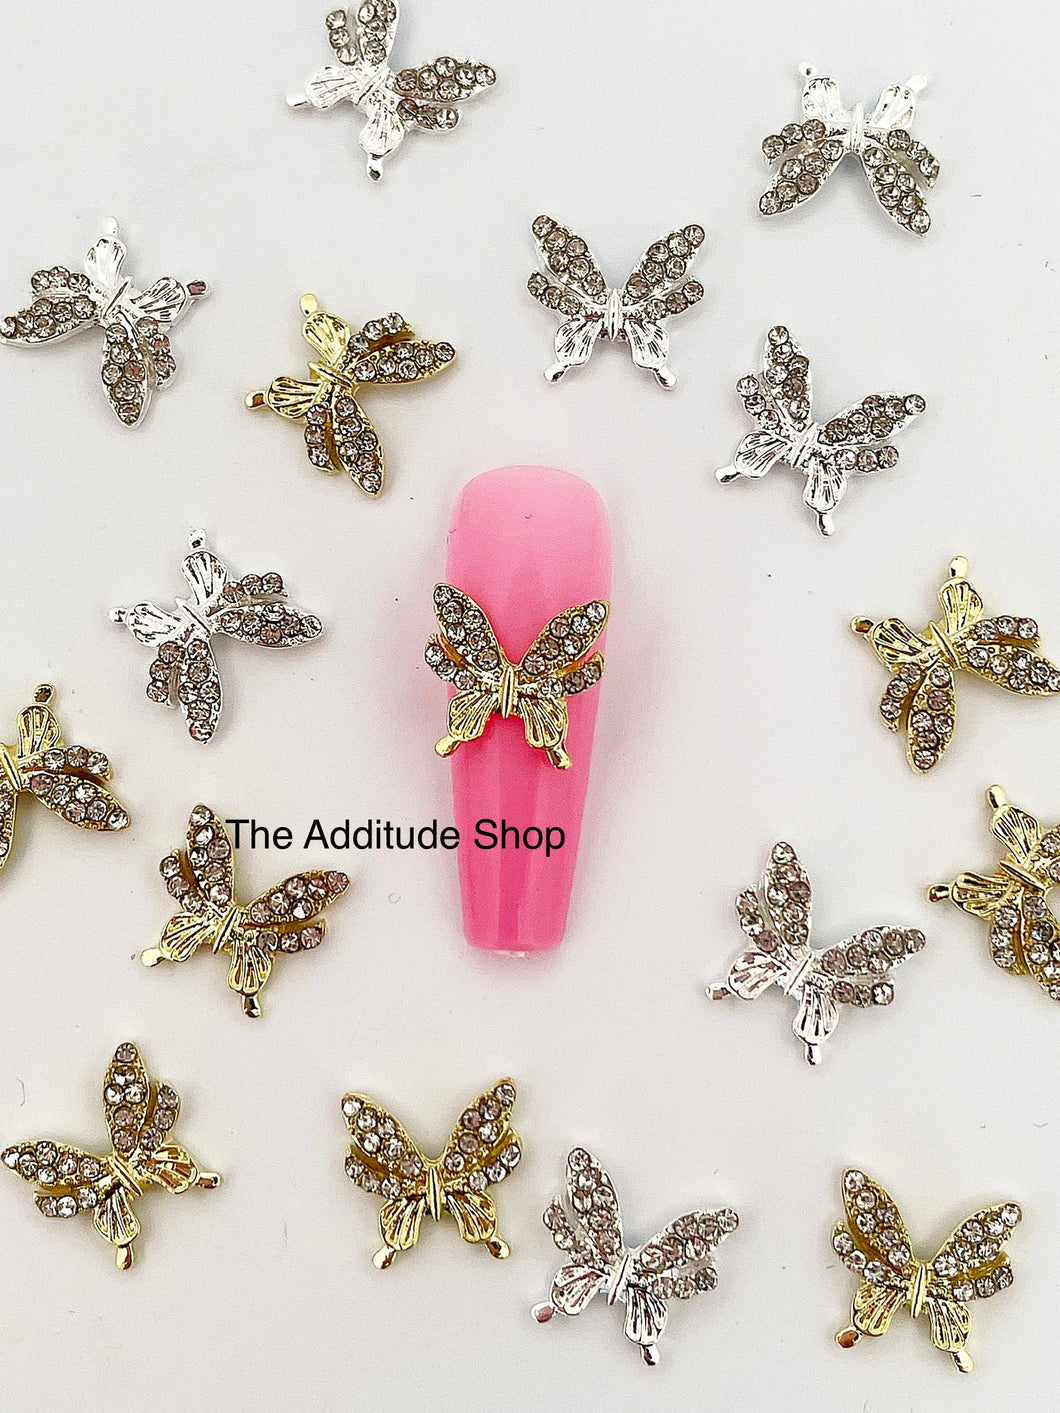 Alloy Rhinestones Butterfly Nail Charms (10 Pieces)